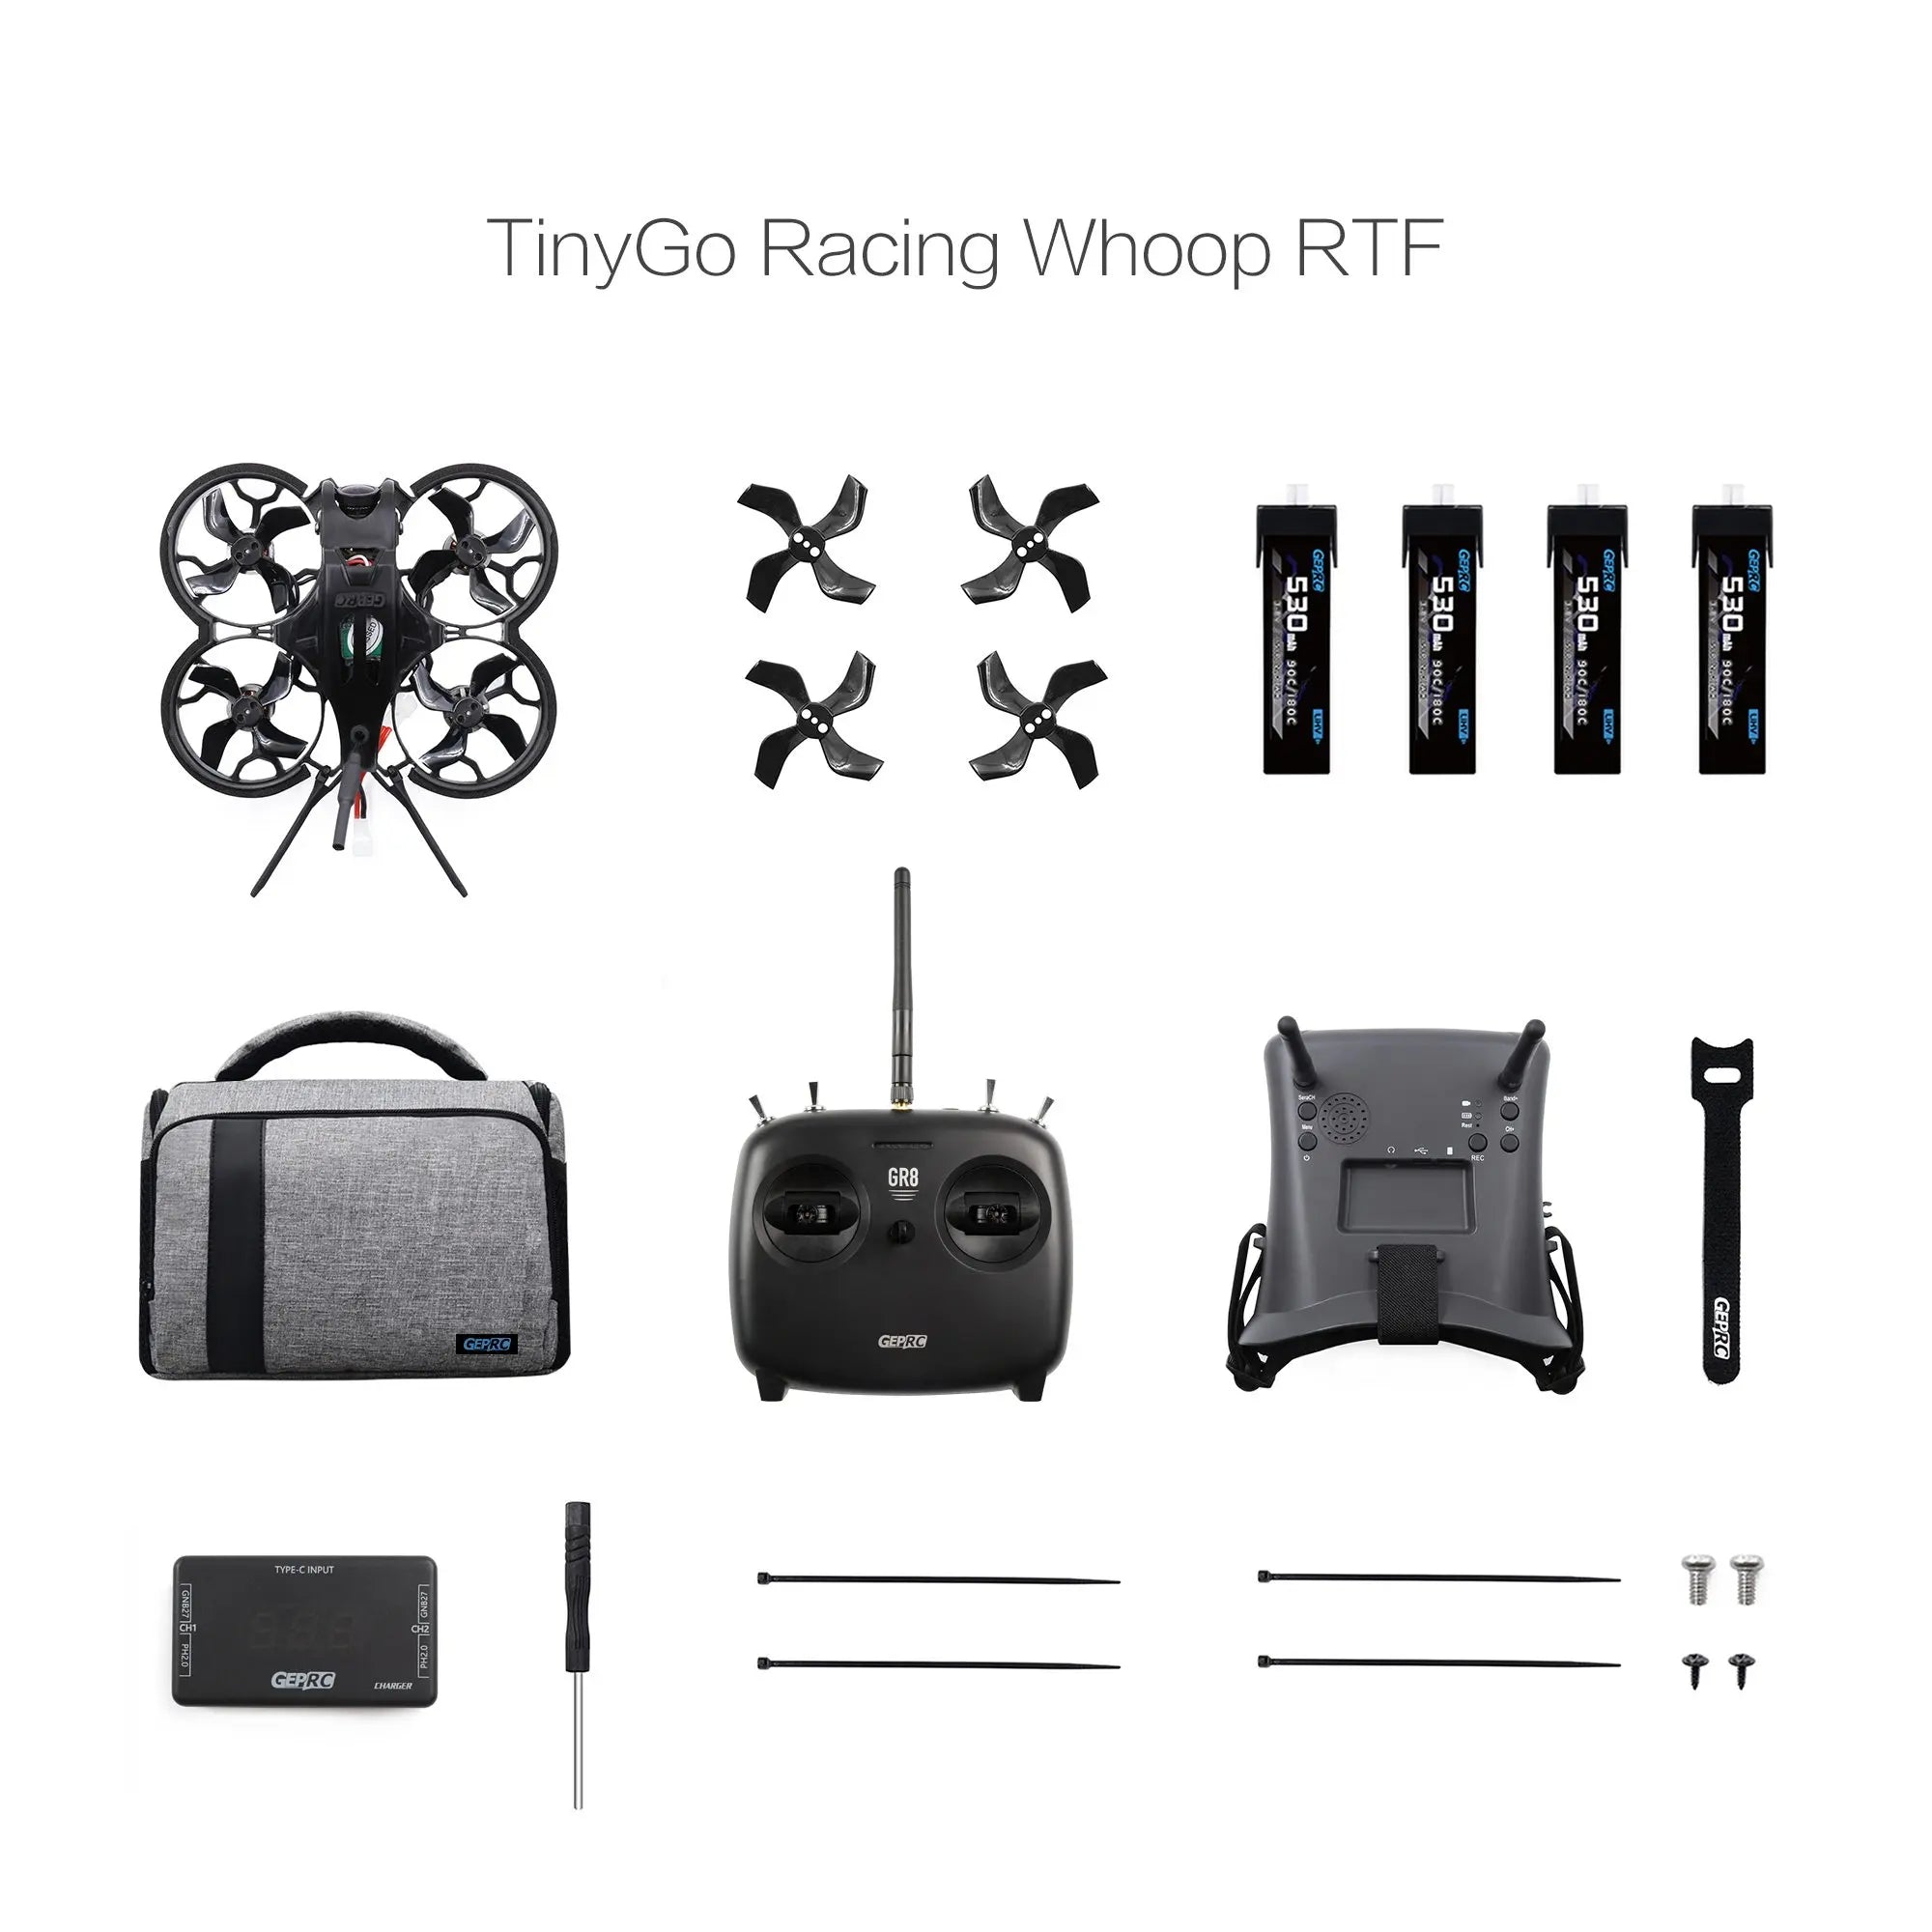 GEPRC TinyGO Racing FPV Whoop RTF Drone, it supports 8 channels and is specially designed for indoor and novices